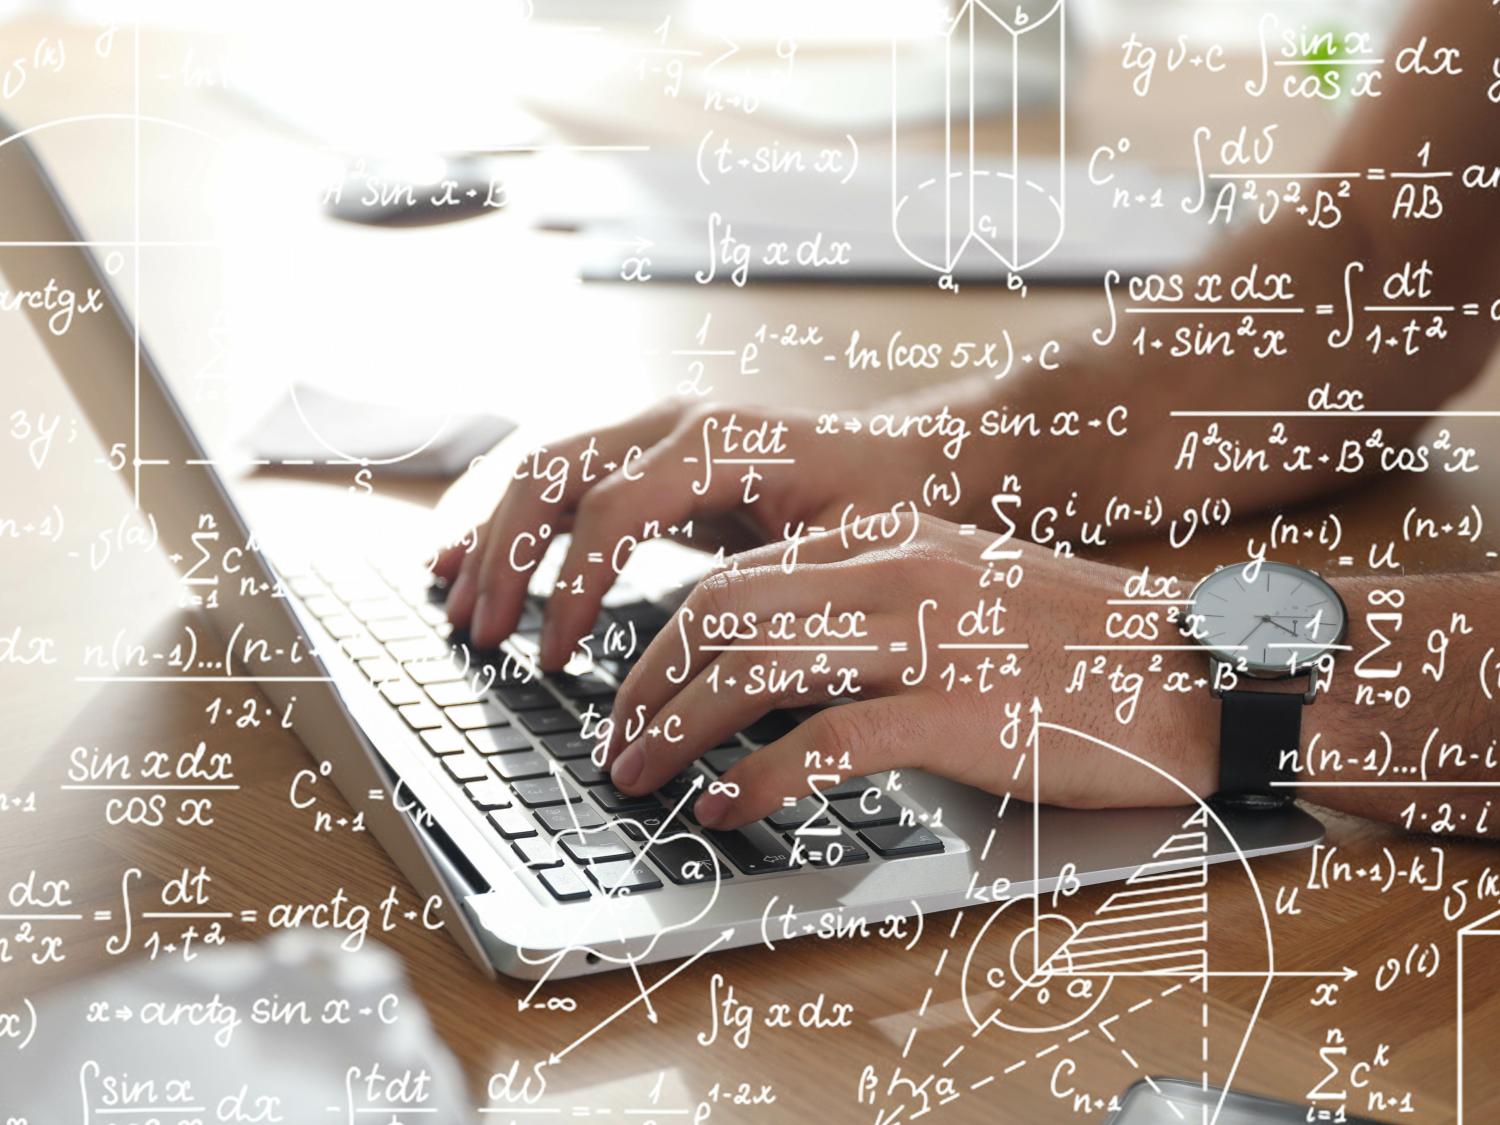 Human hands type on a laptop with mathematical equations written in the foreground.